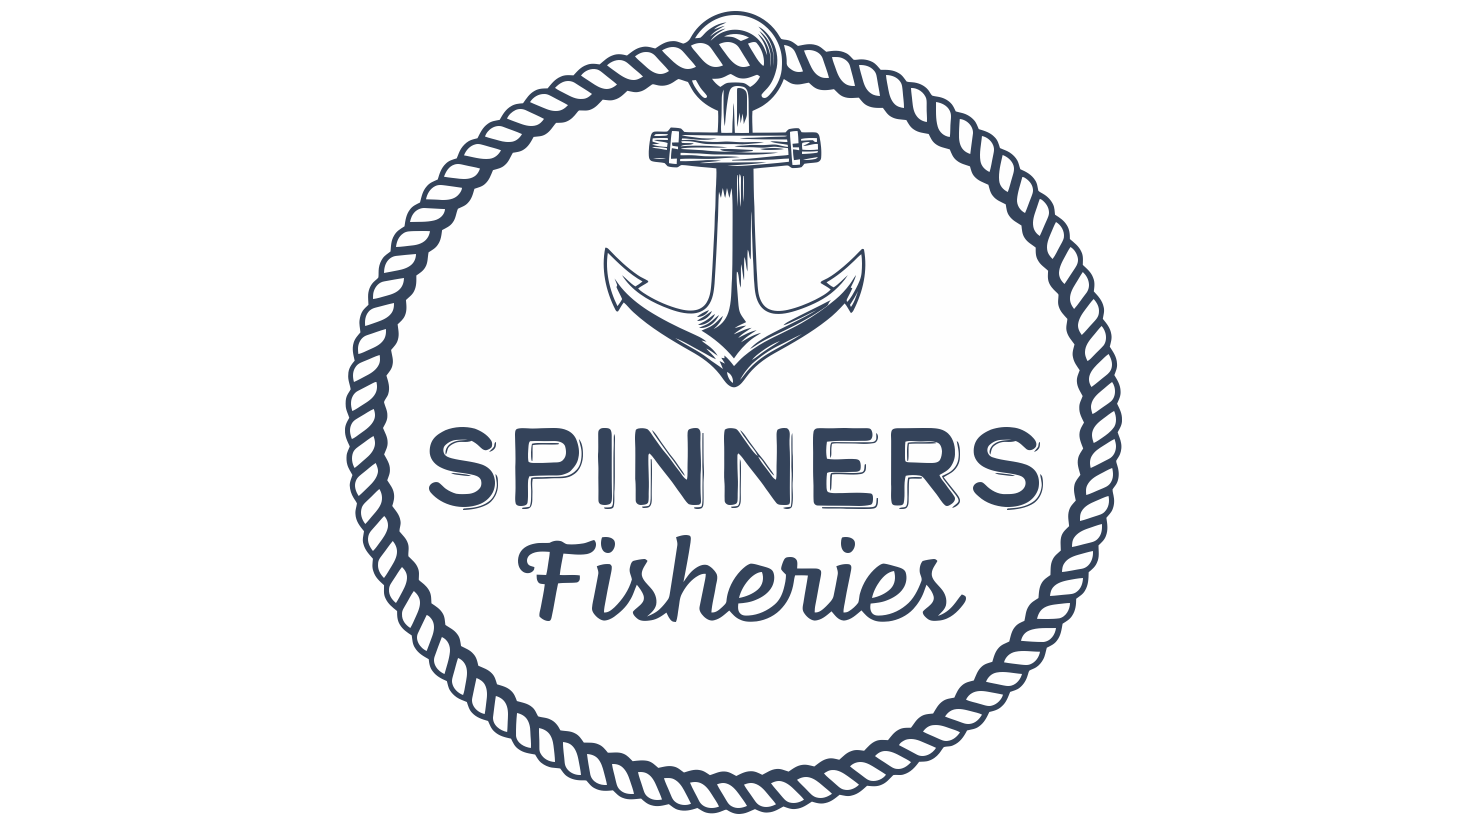 Spinners Fisheries